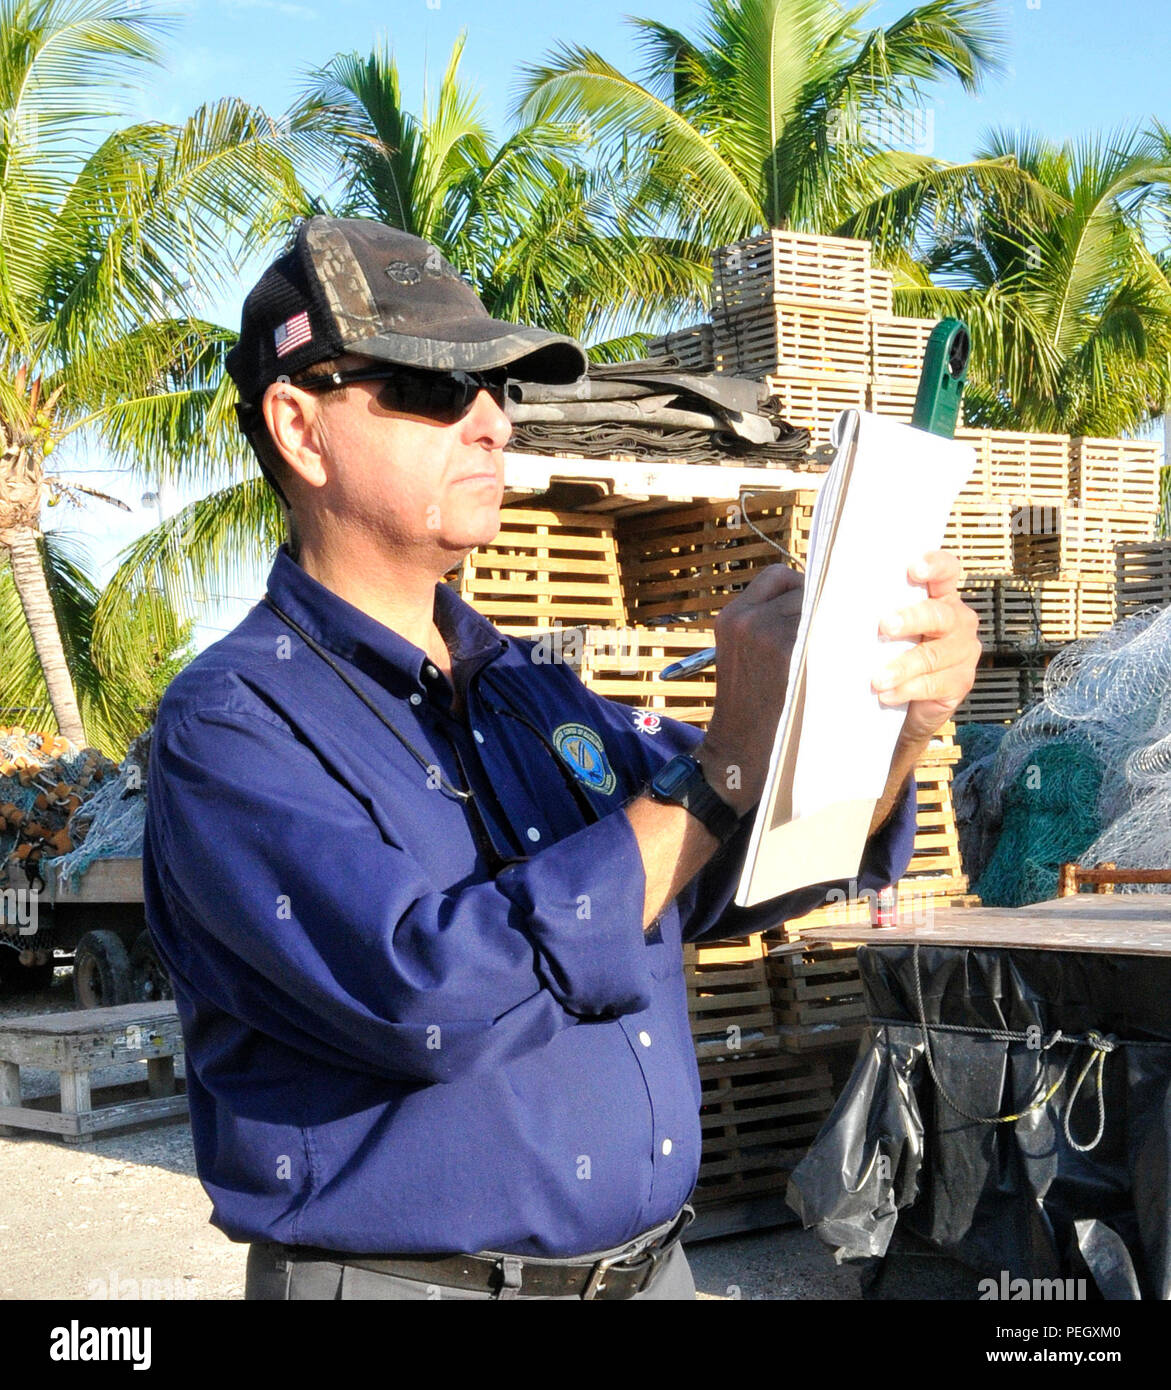 150819-N-HL010-003 KEY WEST, Fla. (Aug. 19, 2015) Medical Entomologist James Cilek records wind speed during a larvicide application at a Stock Island boatyard. Navy Entomology Center of Excellence in Jacksonville, Florida, chose Key West as its testing site for thermal fogging with mosquito larvicide its tropical climate is representative of areas around the world where there is a potential for military presence. (U.S. Navy photo by Jolene Scholl/ Released) Stock Photo